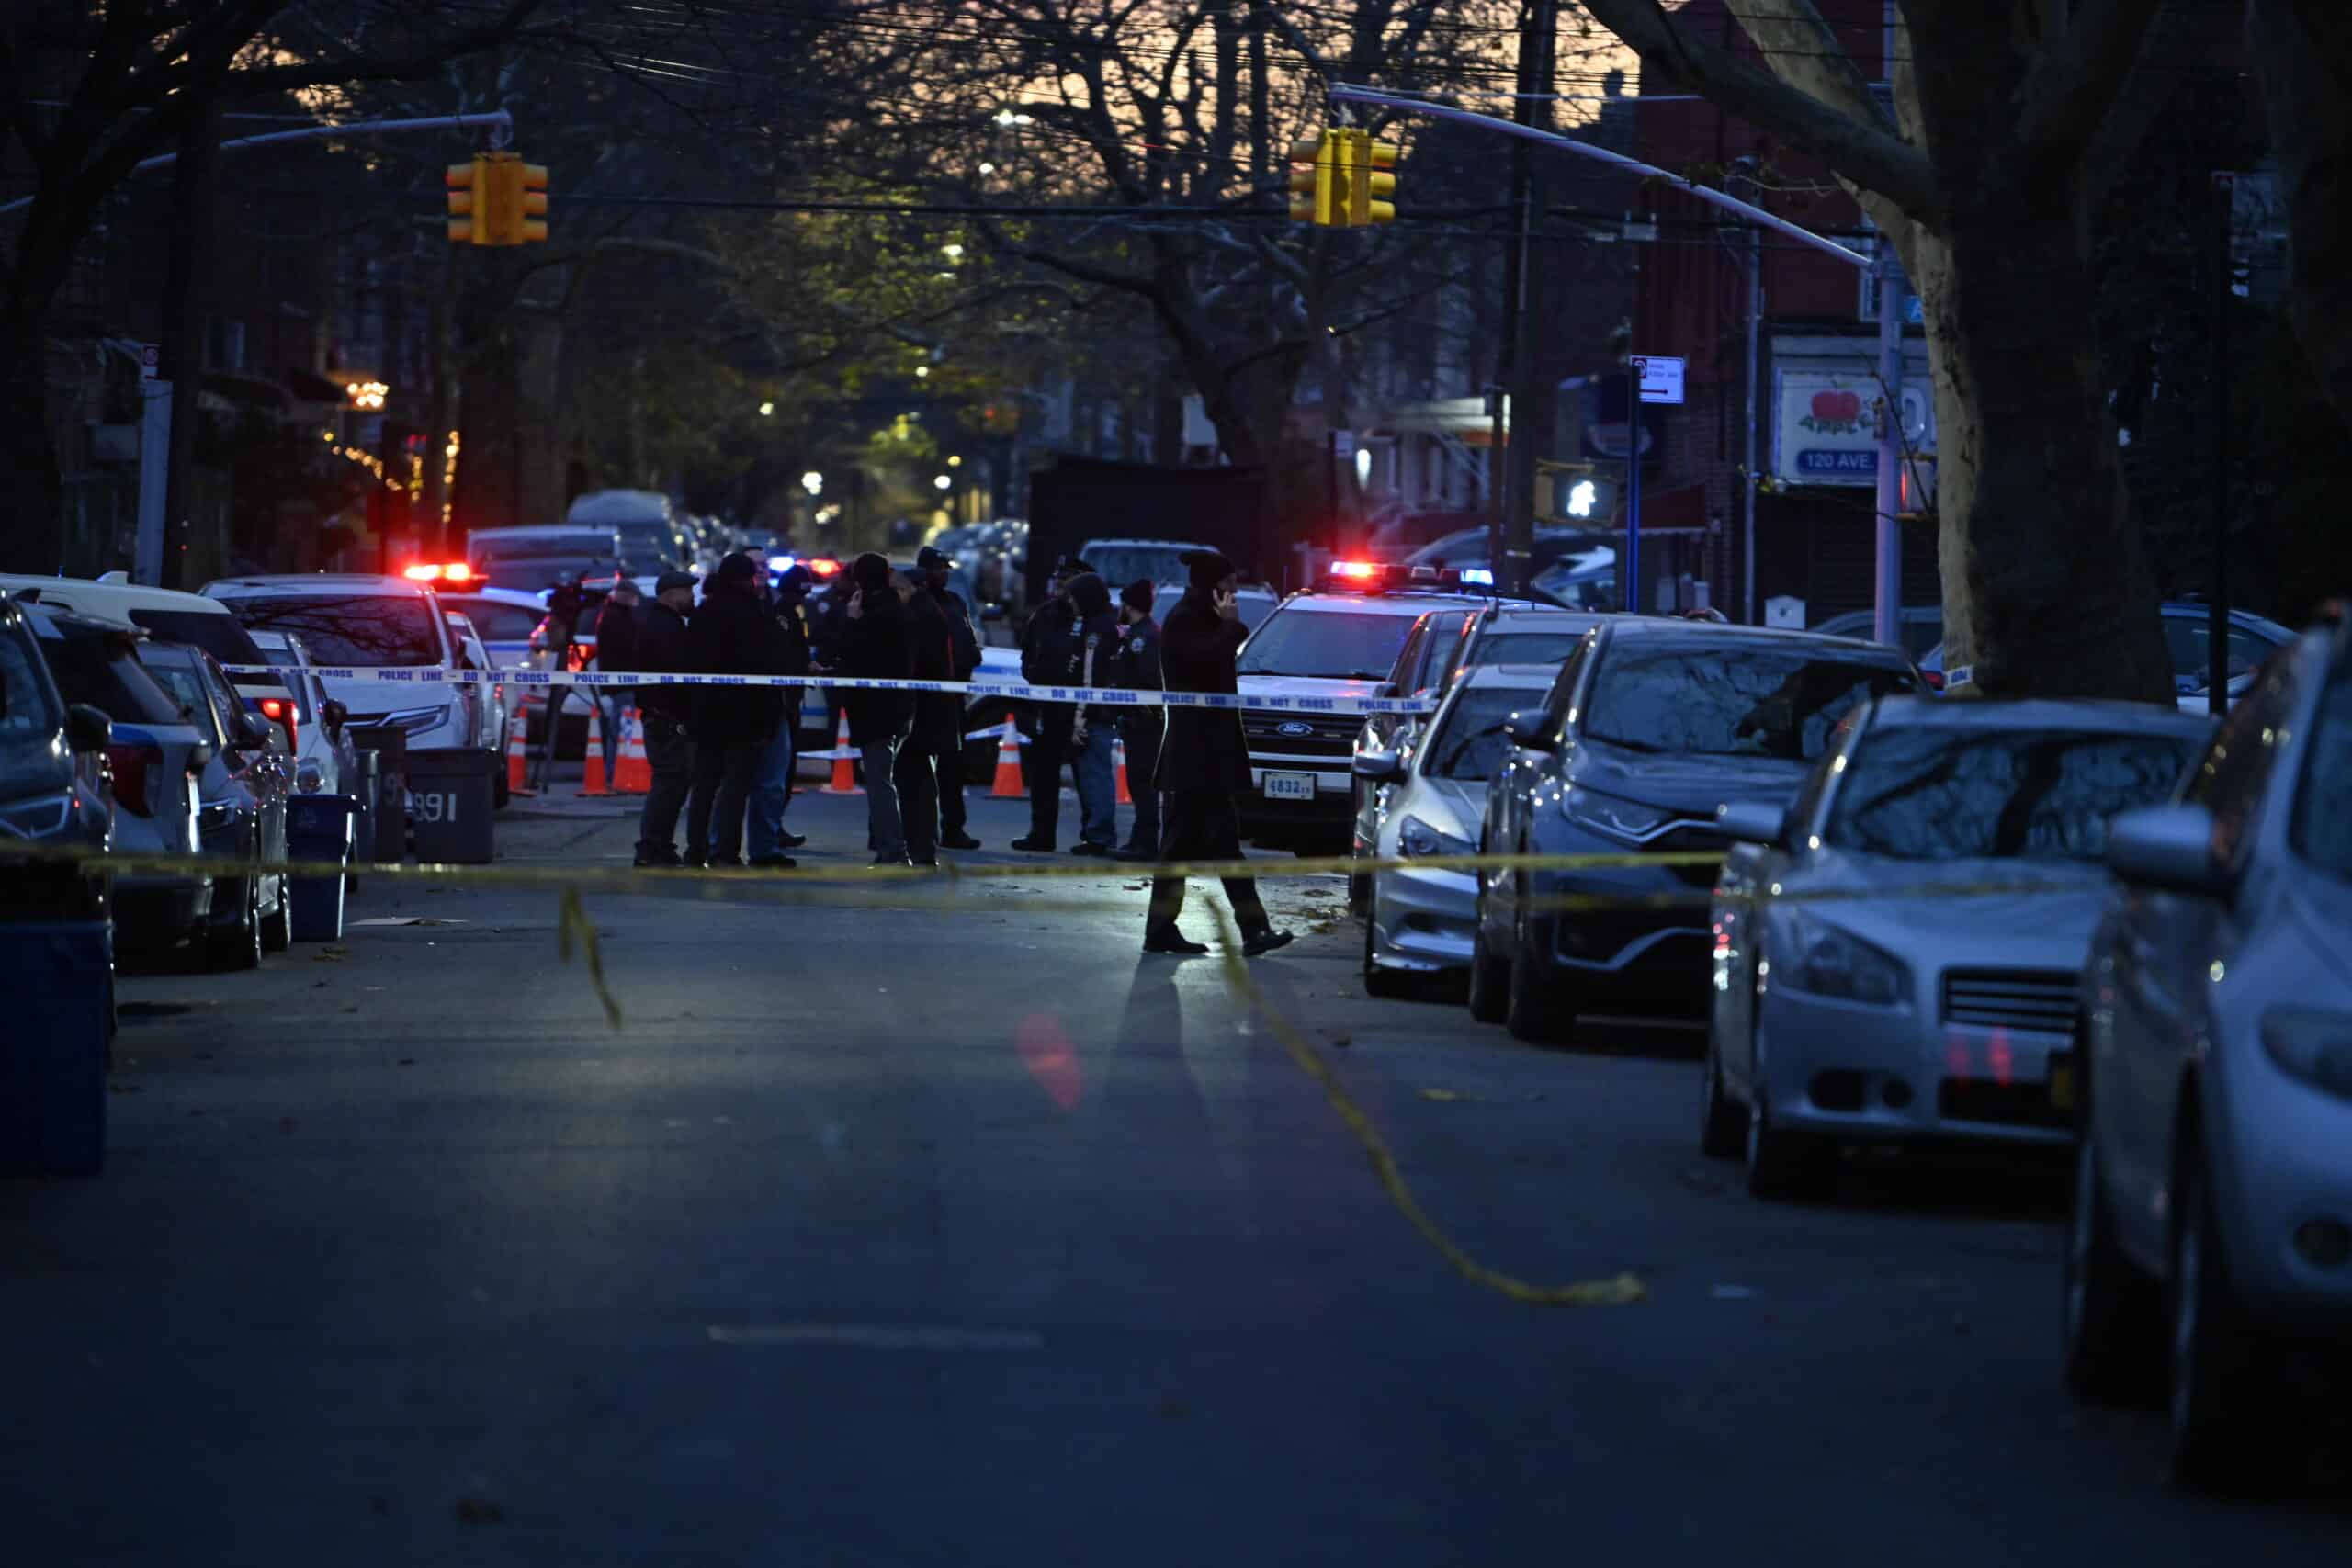 Police investigate the scene of the bloody attack near 1968 W. 9th St. in Brooklyn on Thursday.